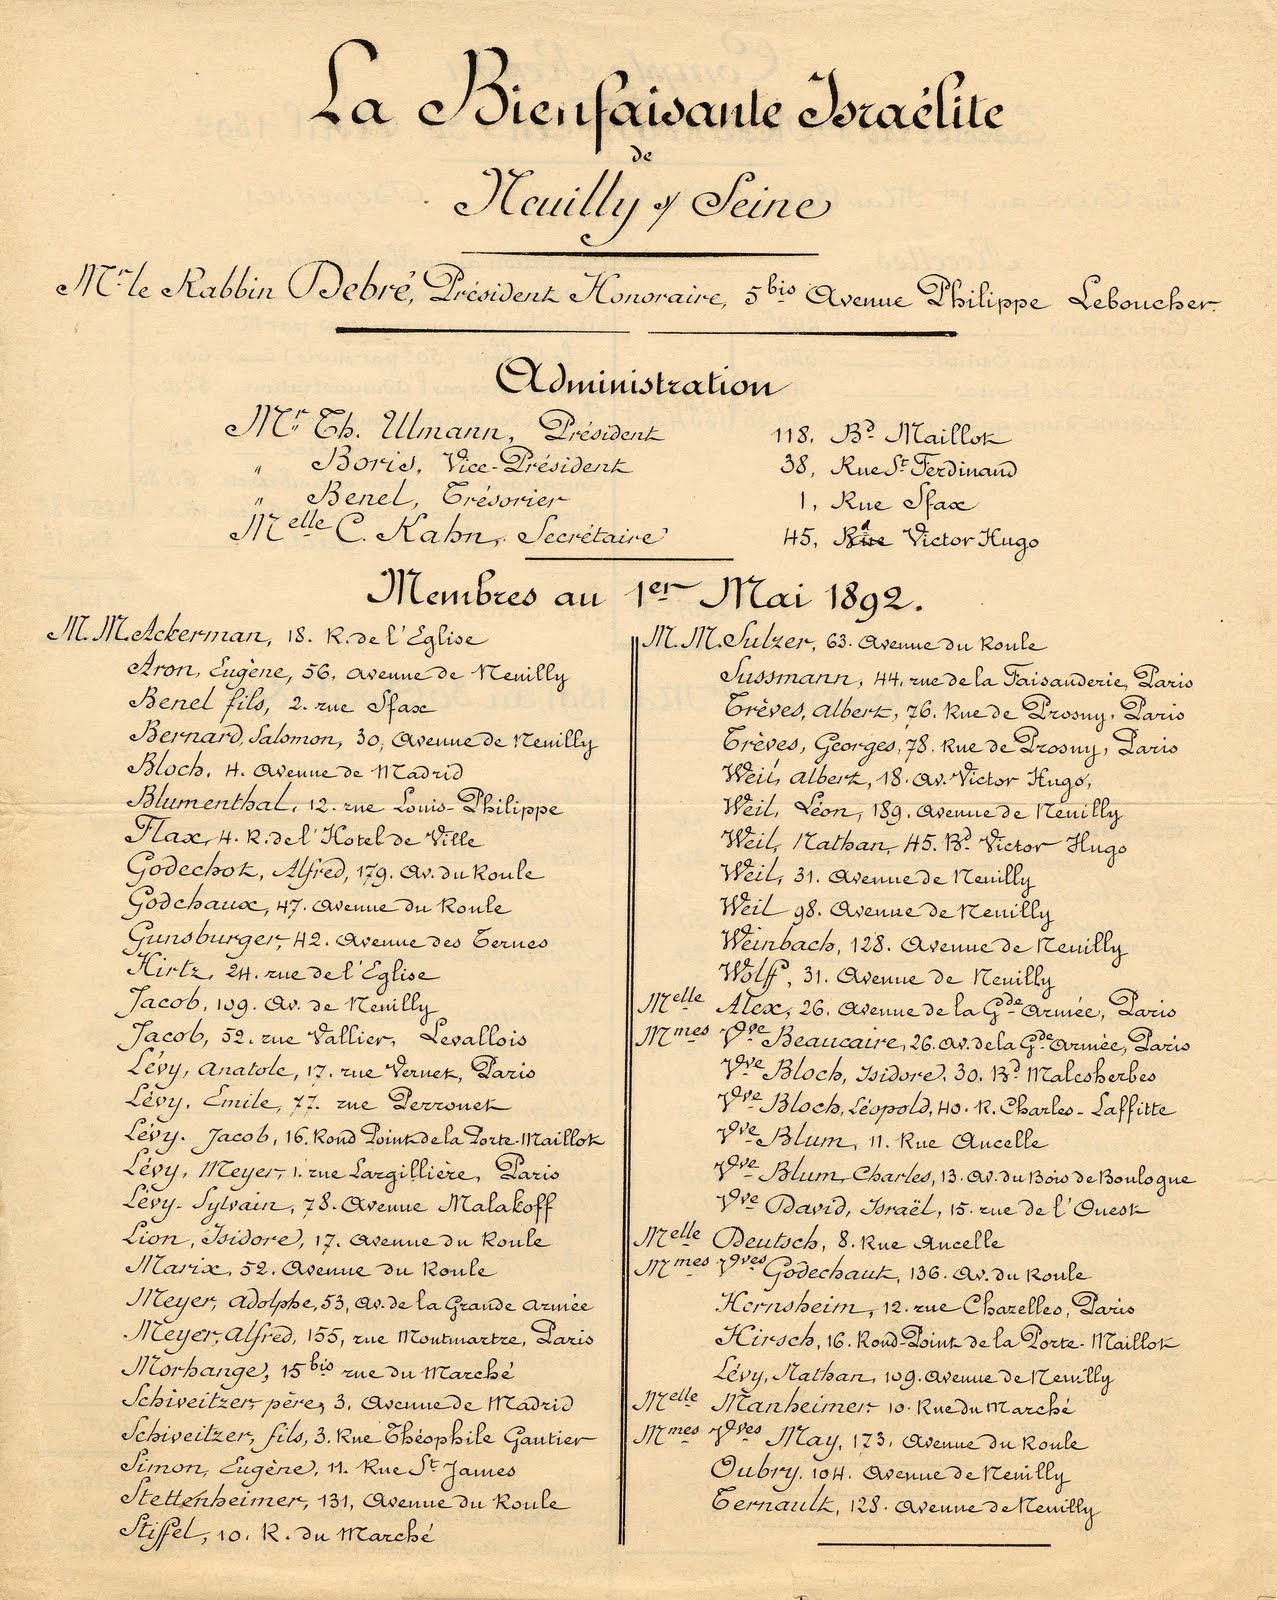 Document titled La Bienfaisante Israelite de Neuilly sur Seine, with a list of Administrators and members.